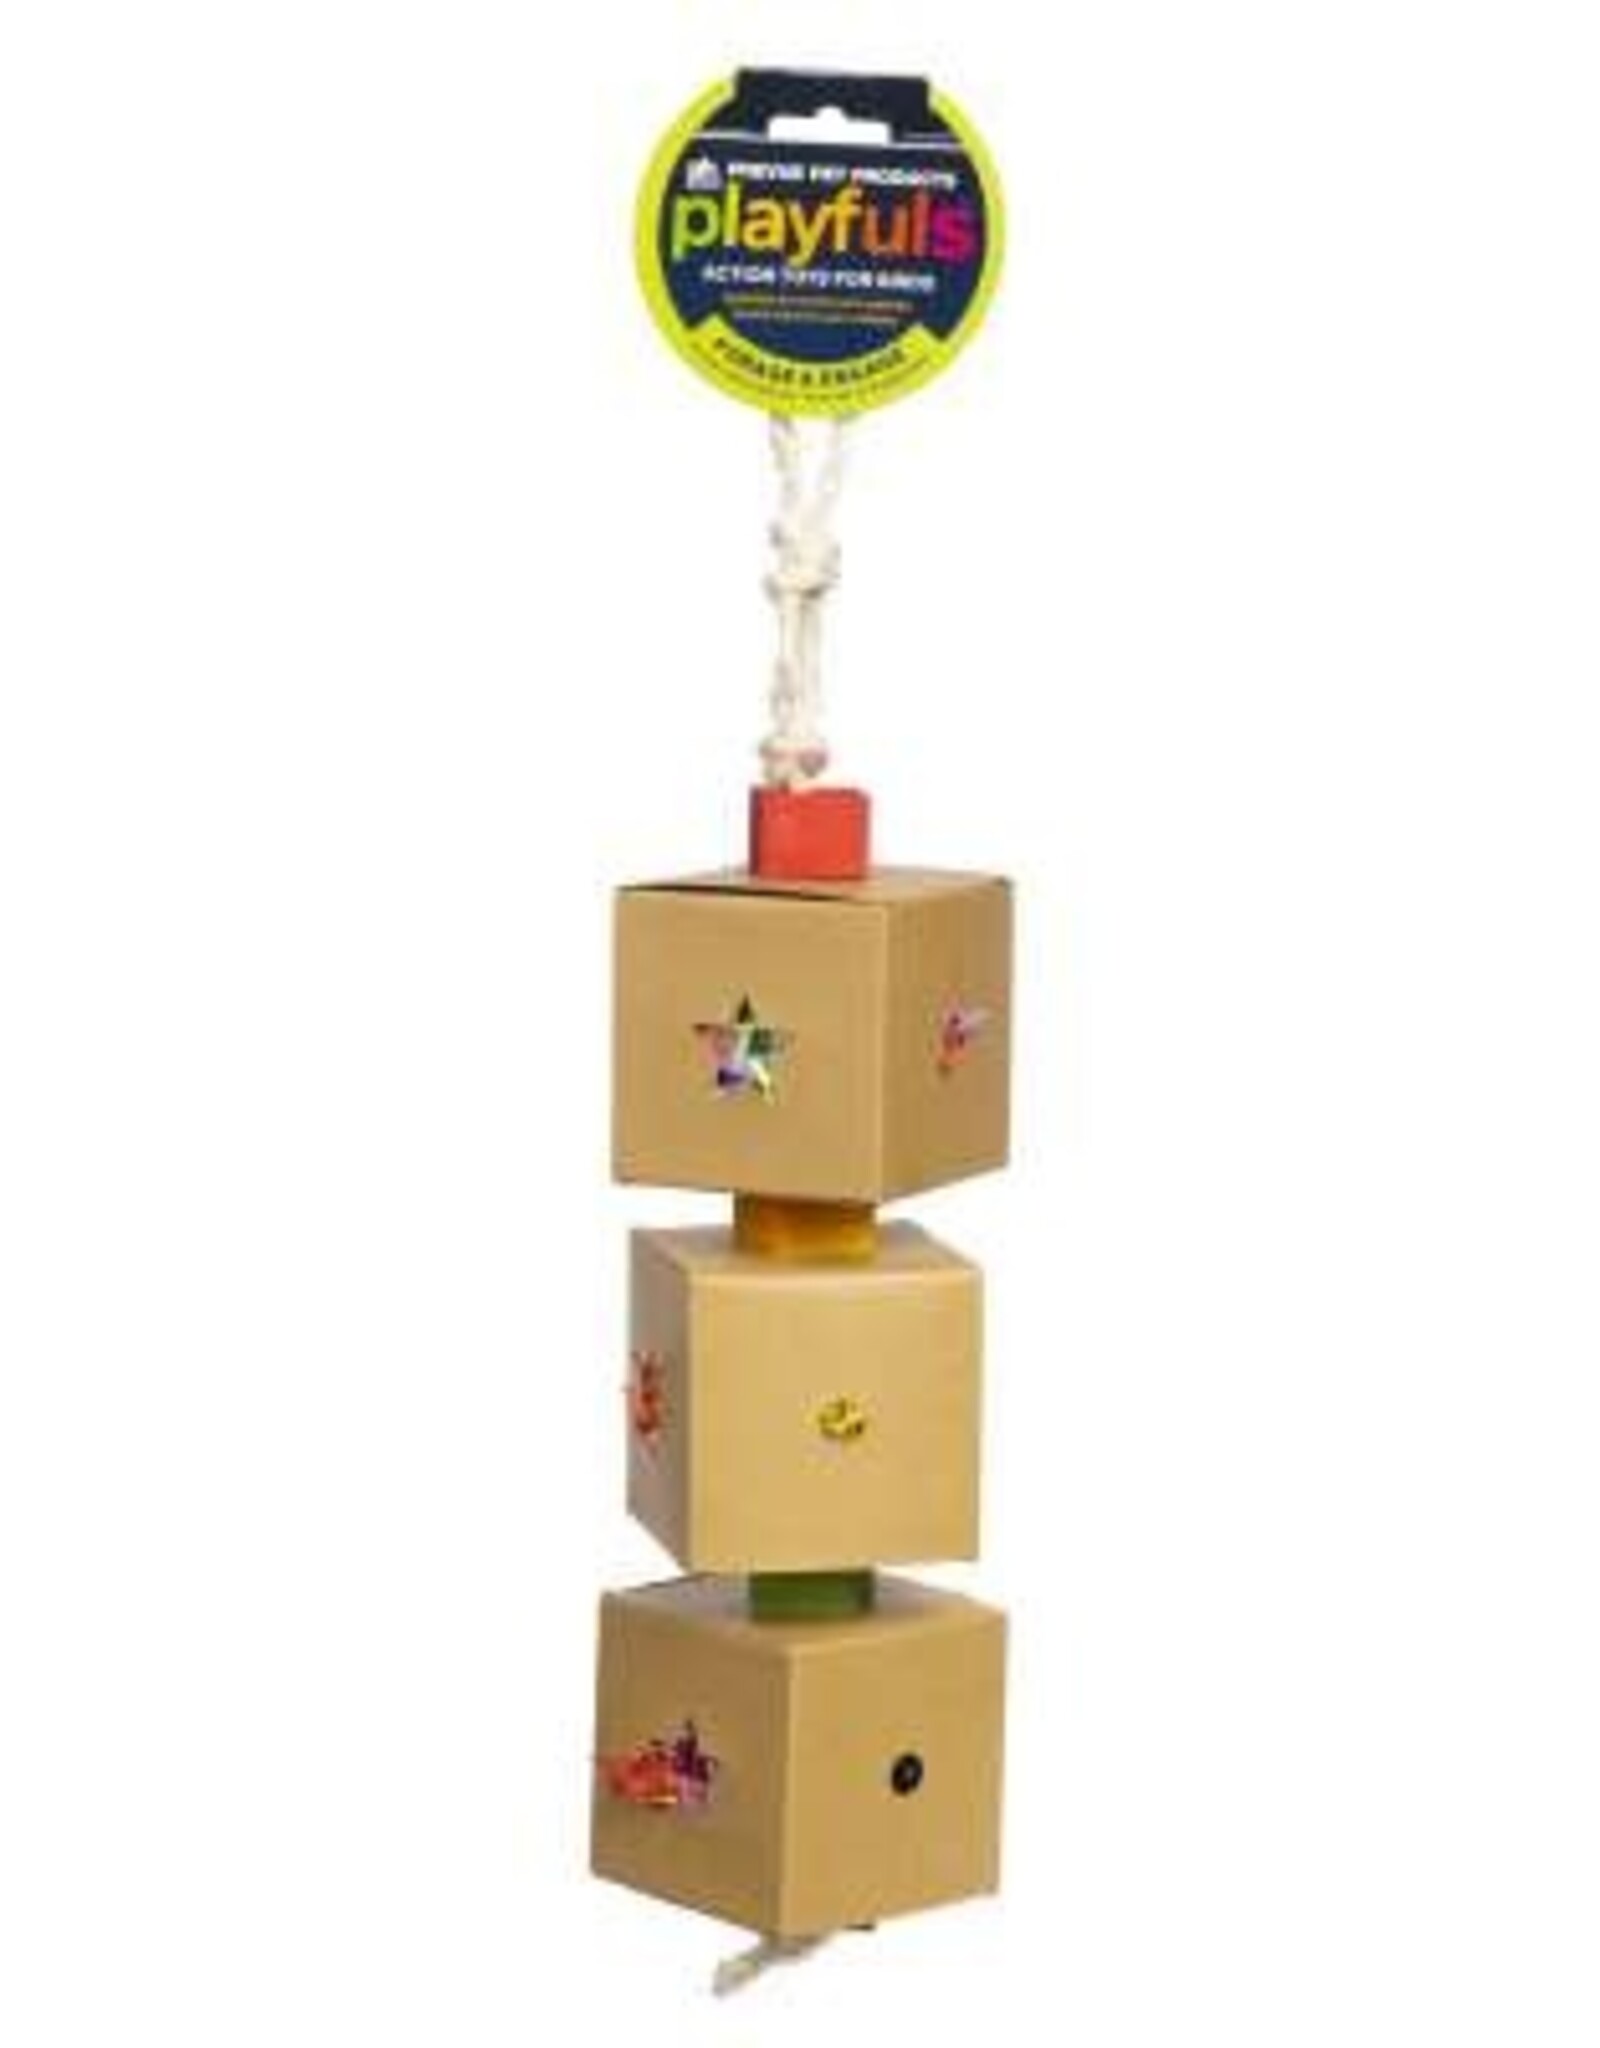 PREVUE PET PRODUCTS, INC. PREVUE- 60246- PLAYFULS- 5.5X3X8.5- 3-BOX STUFF AND HIDE